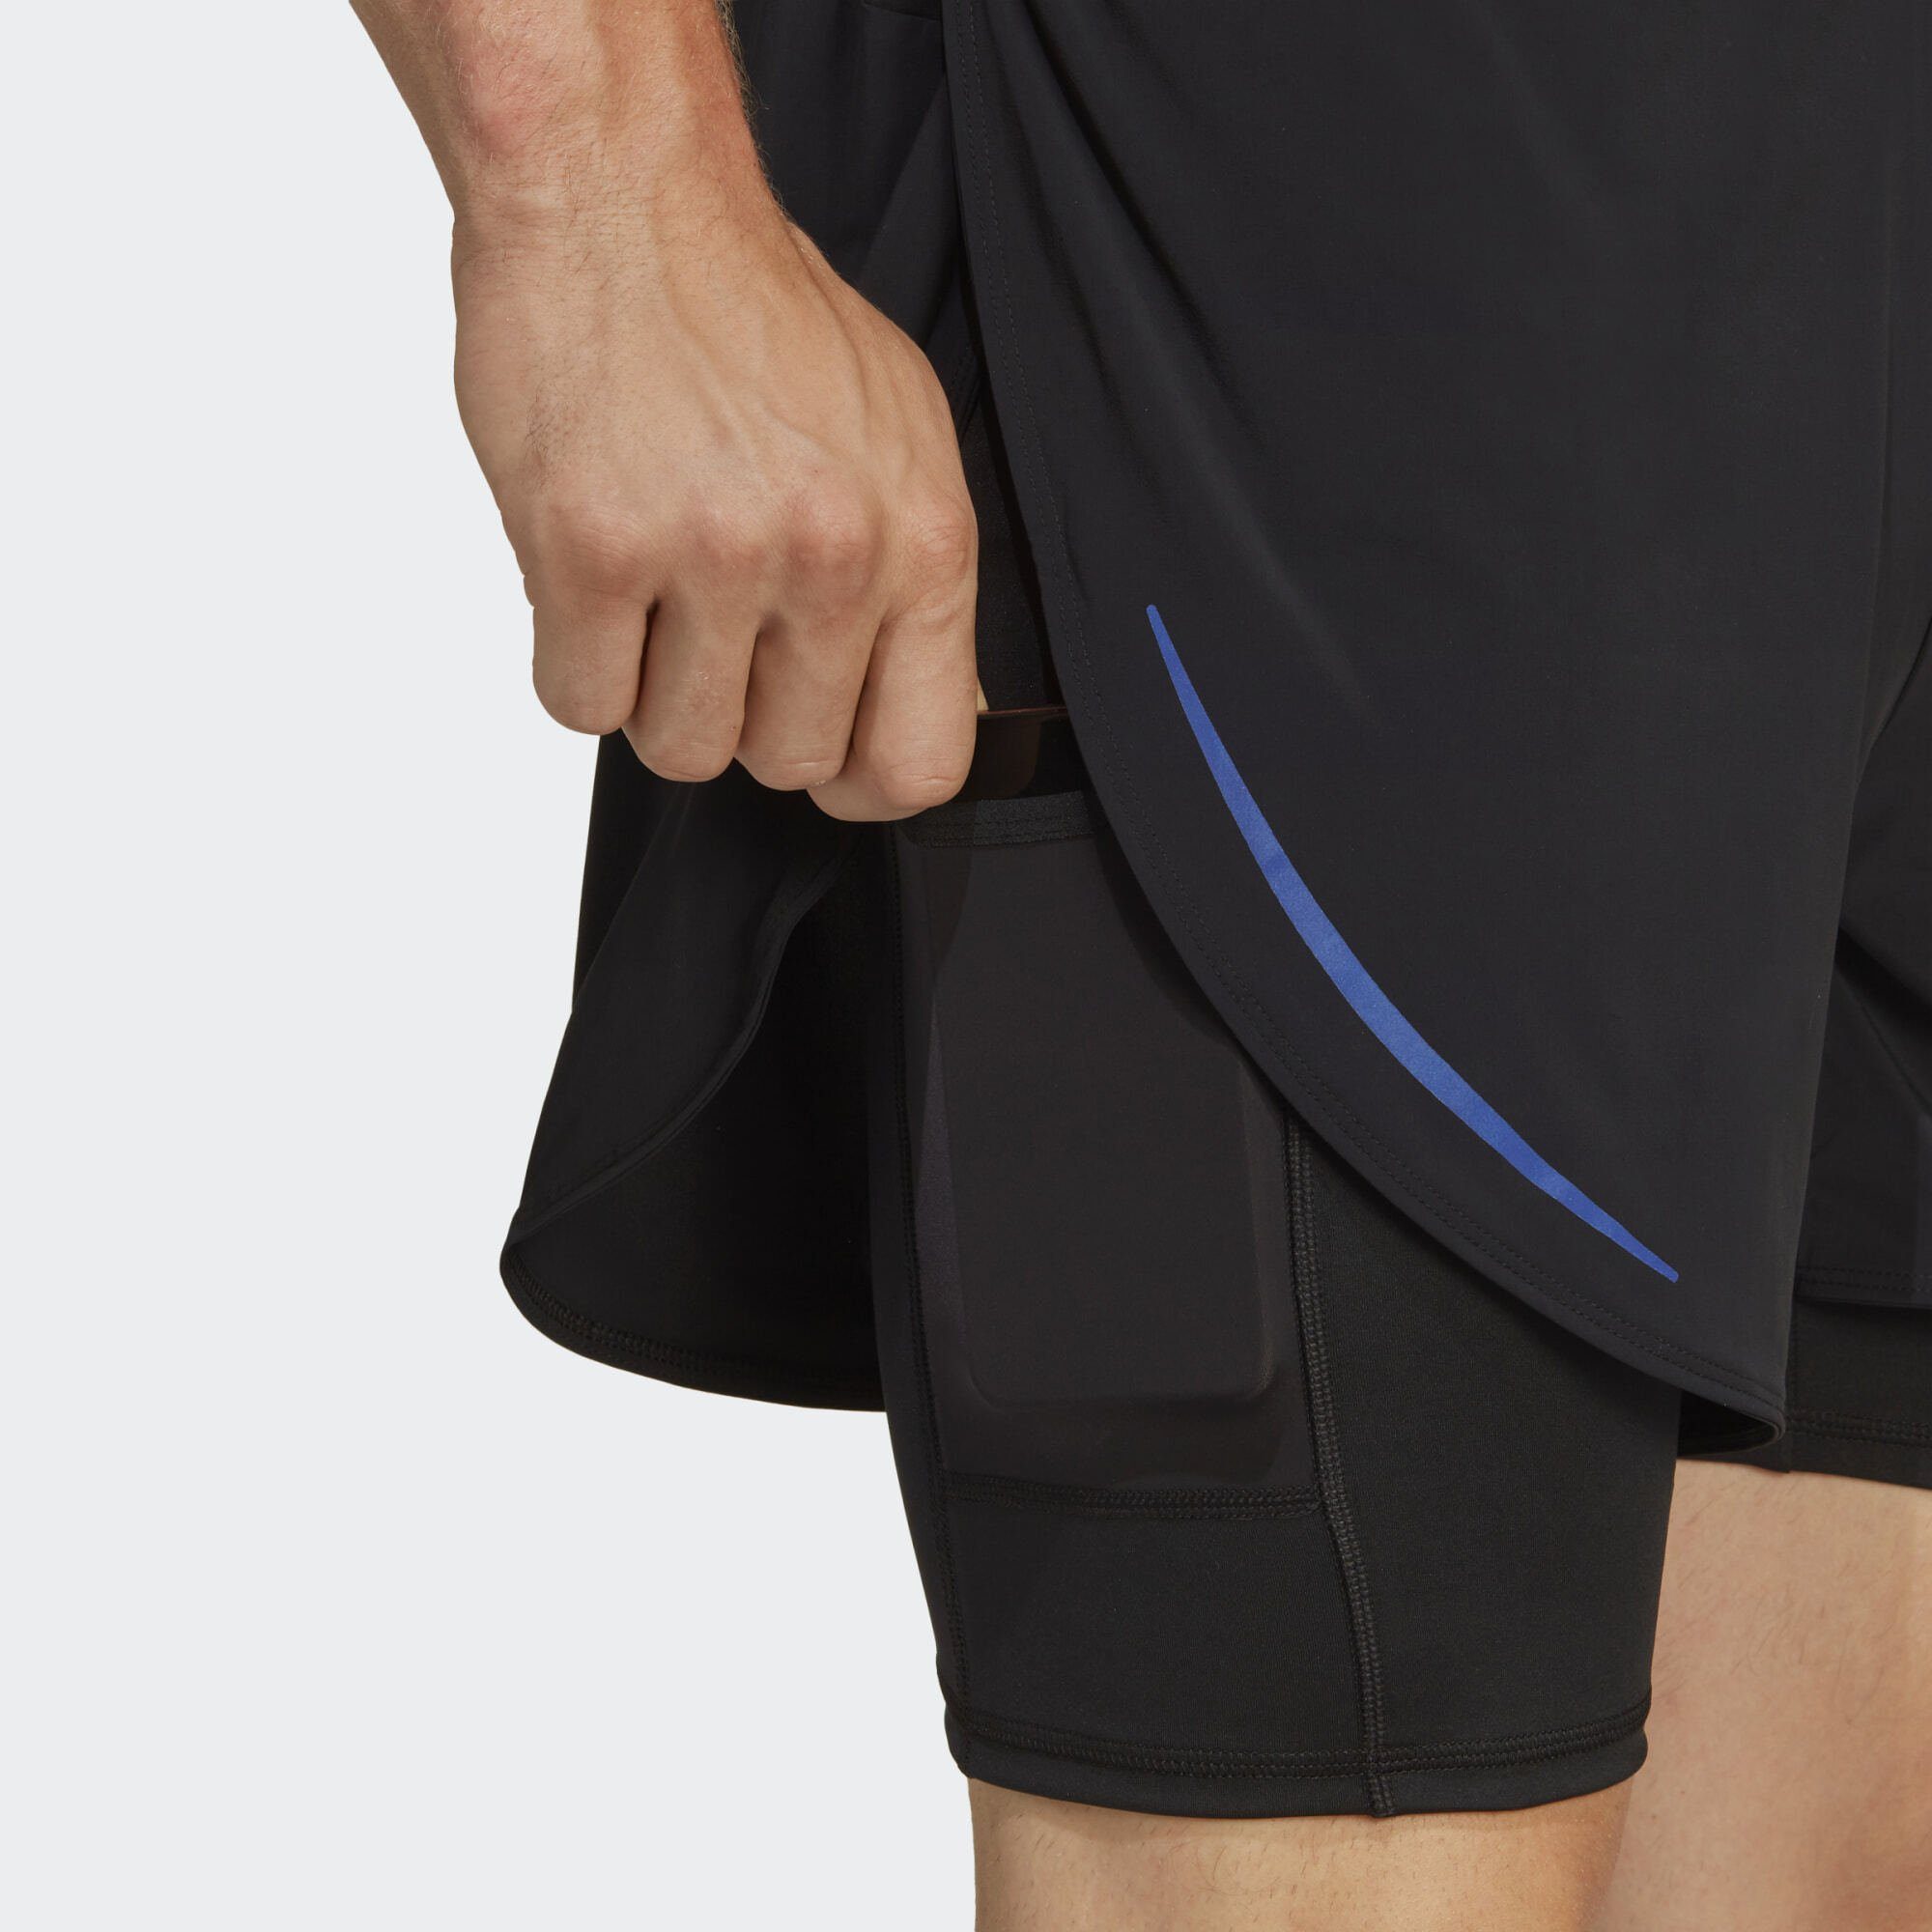 HIIT HEAT.RDY TRAINING adidas 2-IN-1 Performance Black 2-in-1-Shorts SHORTS